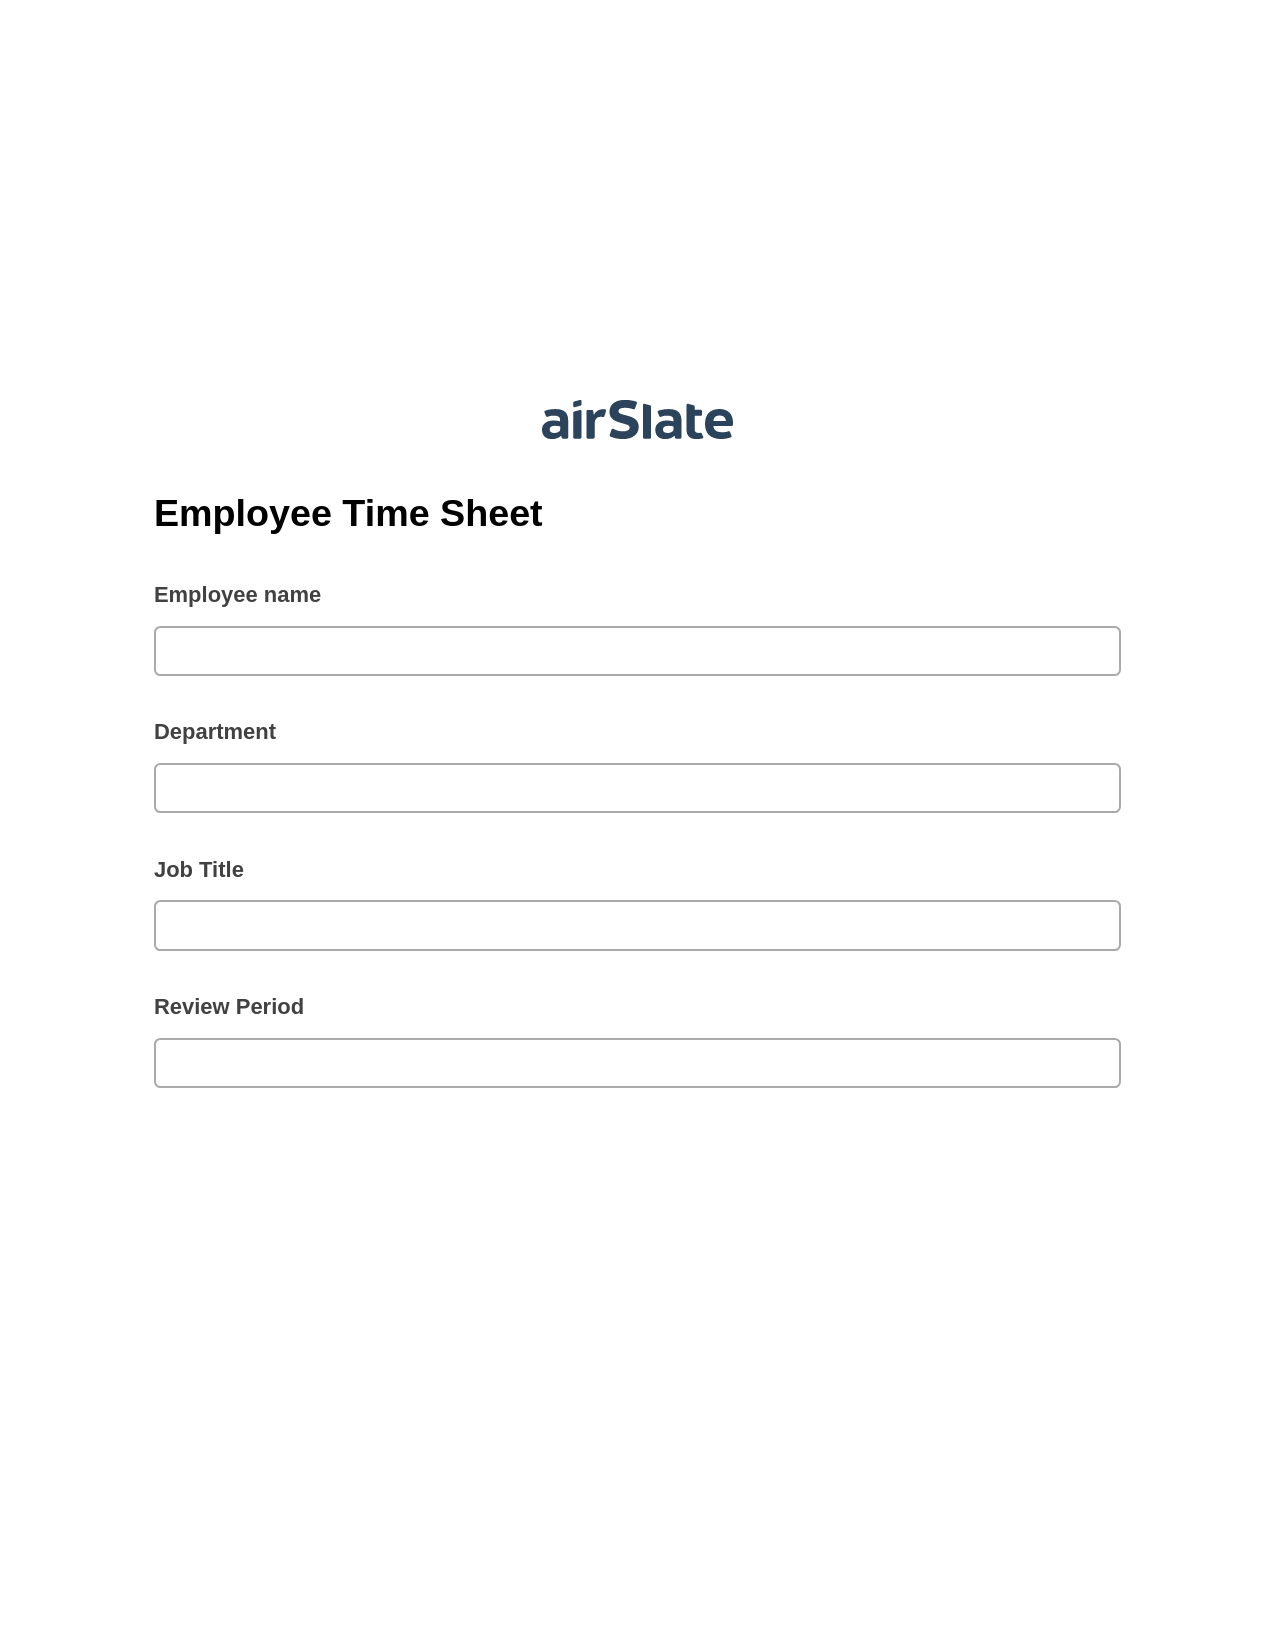 Multirole Employee Time Sheet Pre-fill from Office 365 Excel Bot, Remove Tags From Slate Bot, Archive to Google Drive Bot